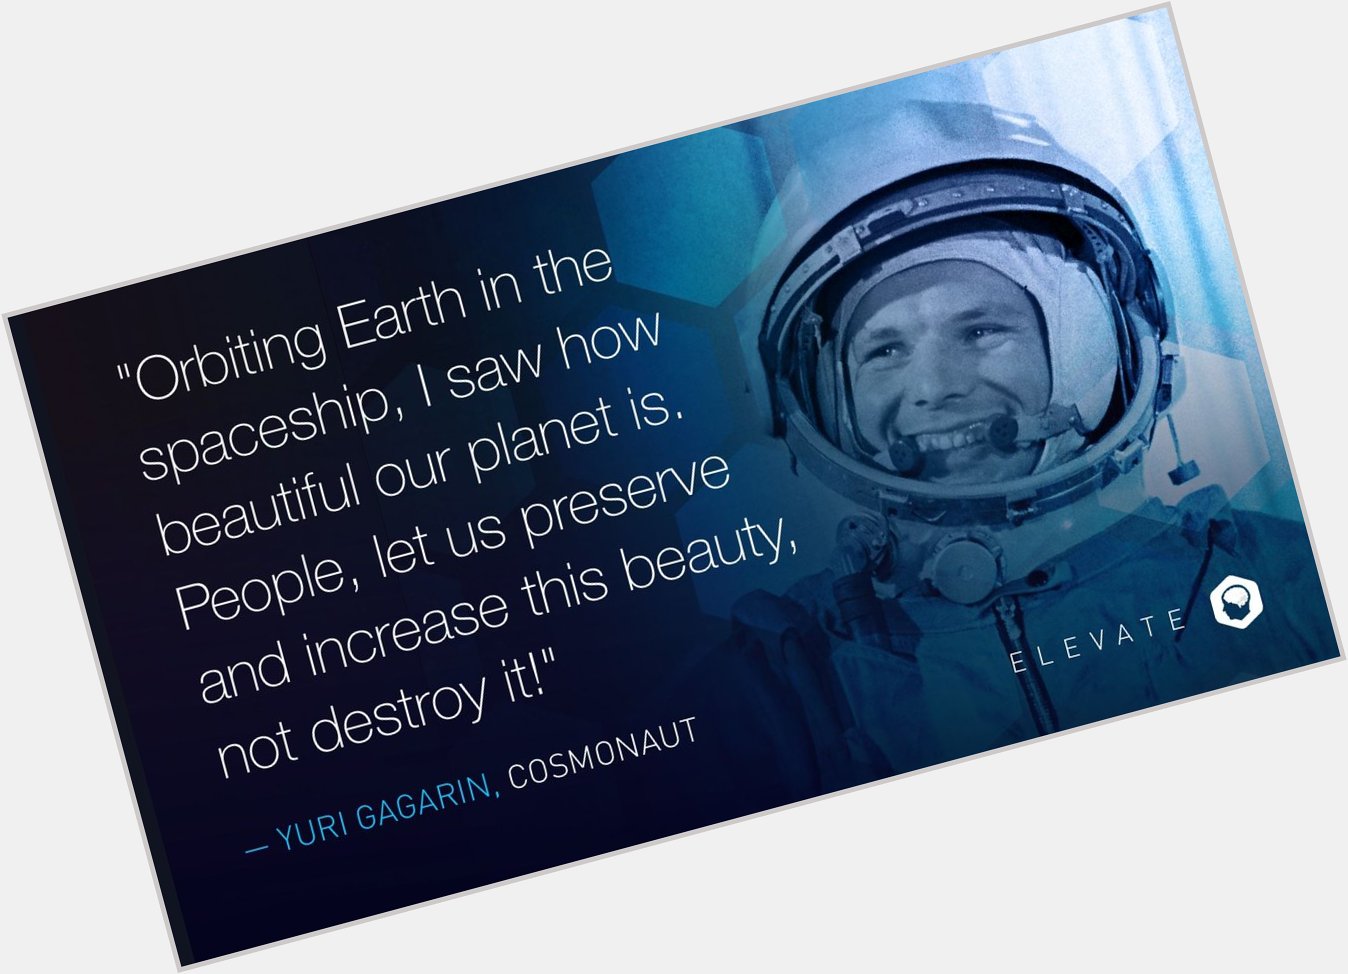 Happy birthday to cosmonaut Yuri Gagarin. He is best known for being the first person to venture into outer space. 